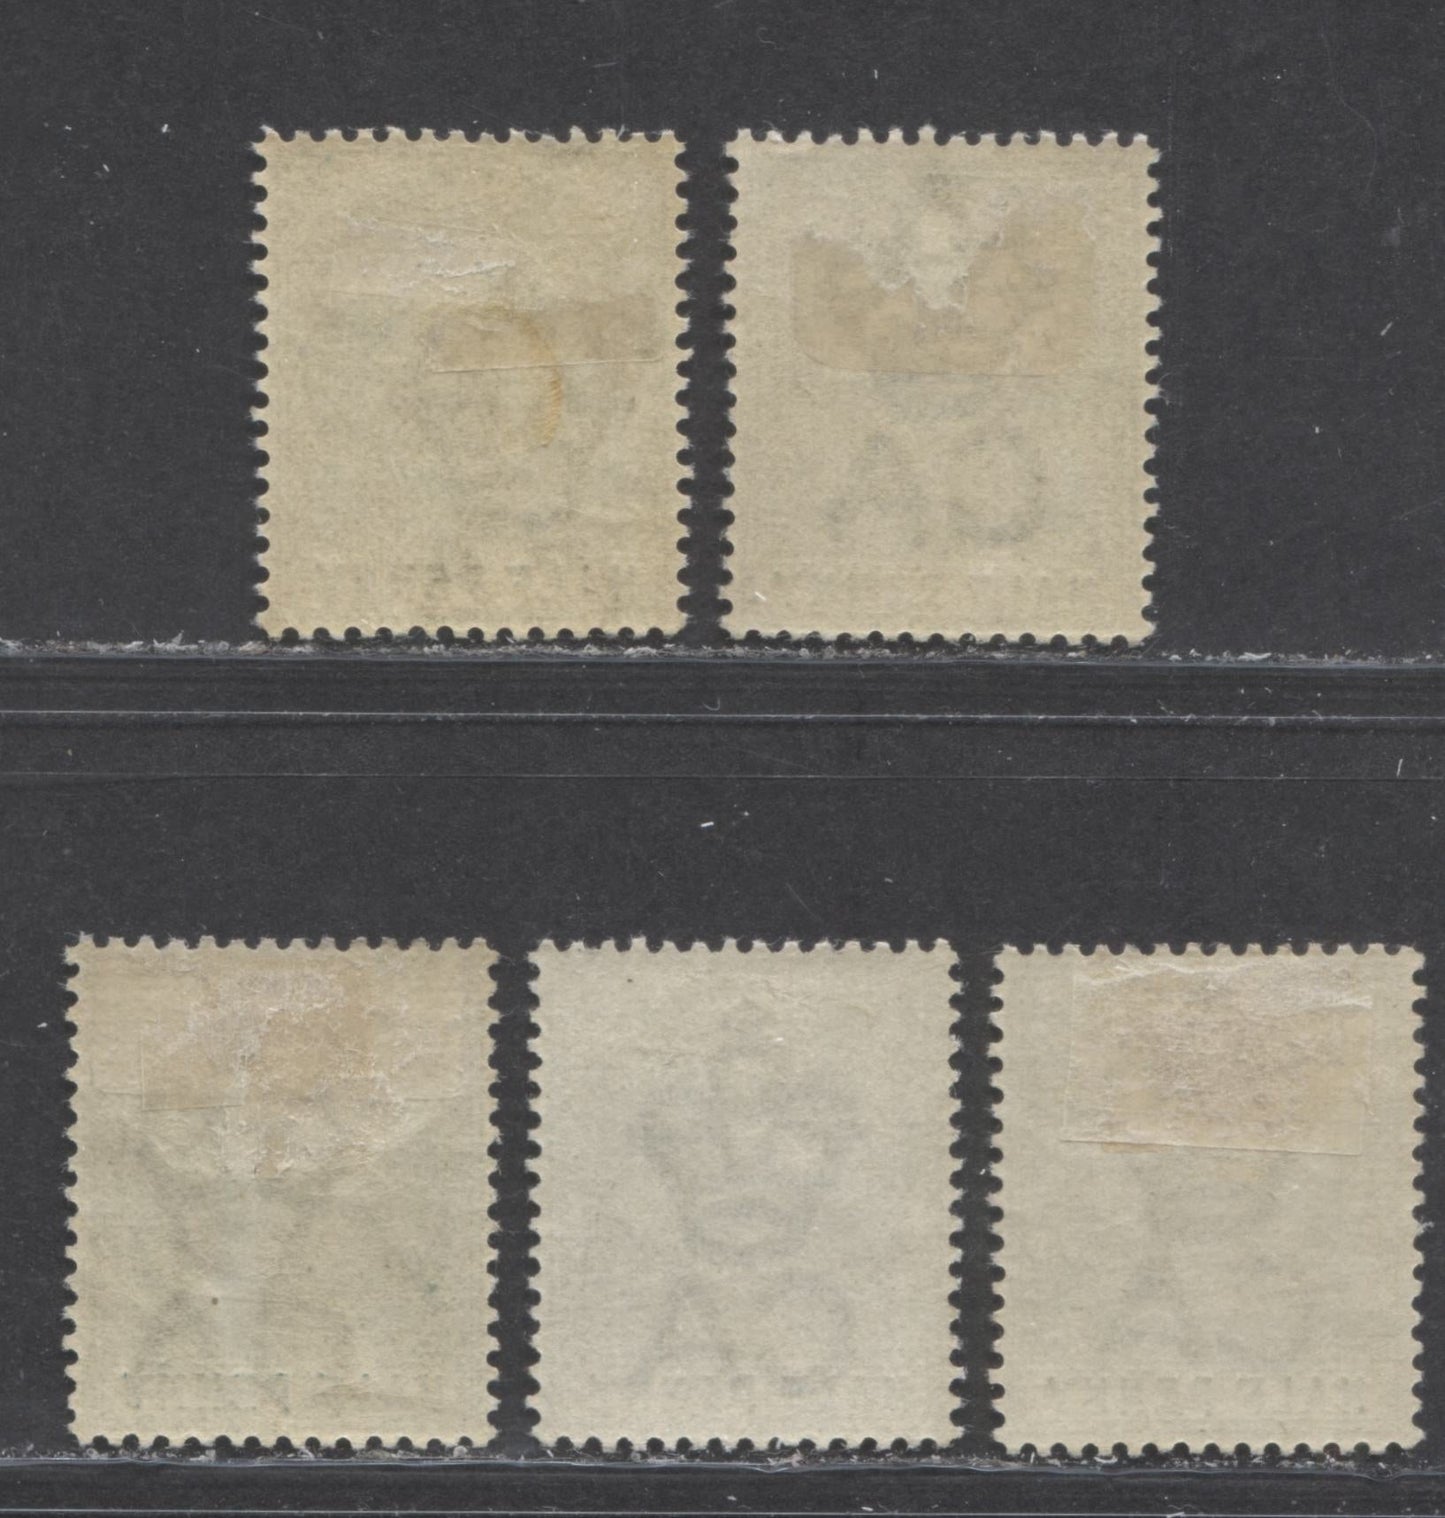 Lot 259 Lagos SG#21 (SC#13) 1/2d Green, Queen Victoria, 1884-1886 Second Crown CA Watermarked Issue, A Mint Group of 5 Different Printings, Likely Between 1900 and 1902, Both Plates 1 and 2, 2022 Scott Classic Cat. $11.25 USD